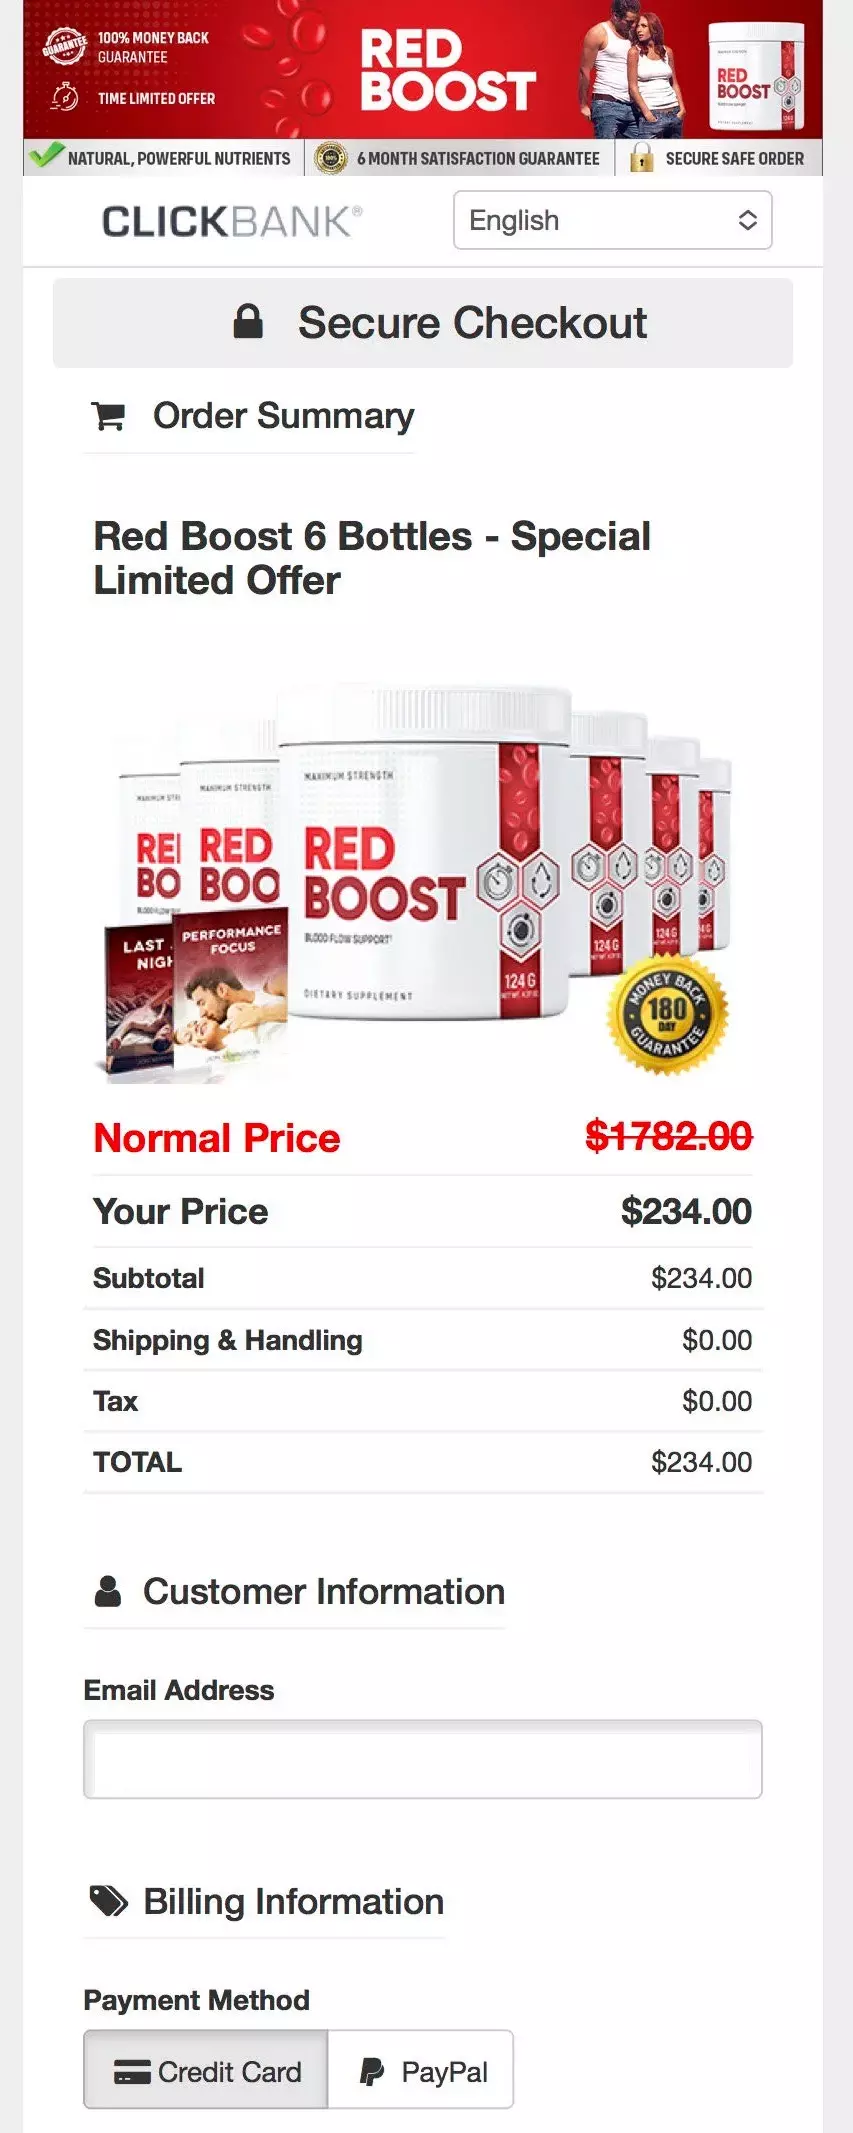 Red Boost order form